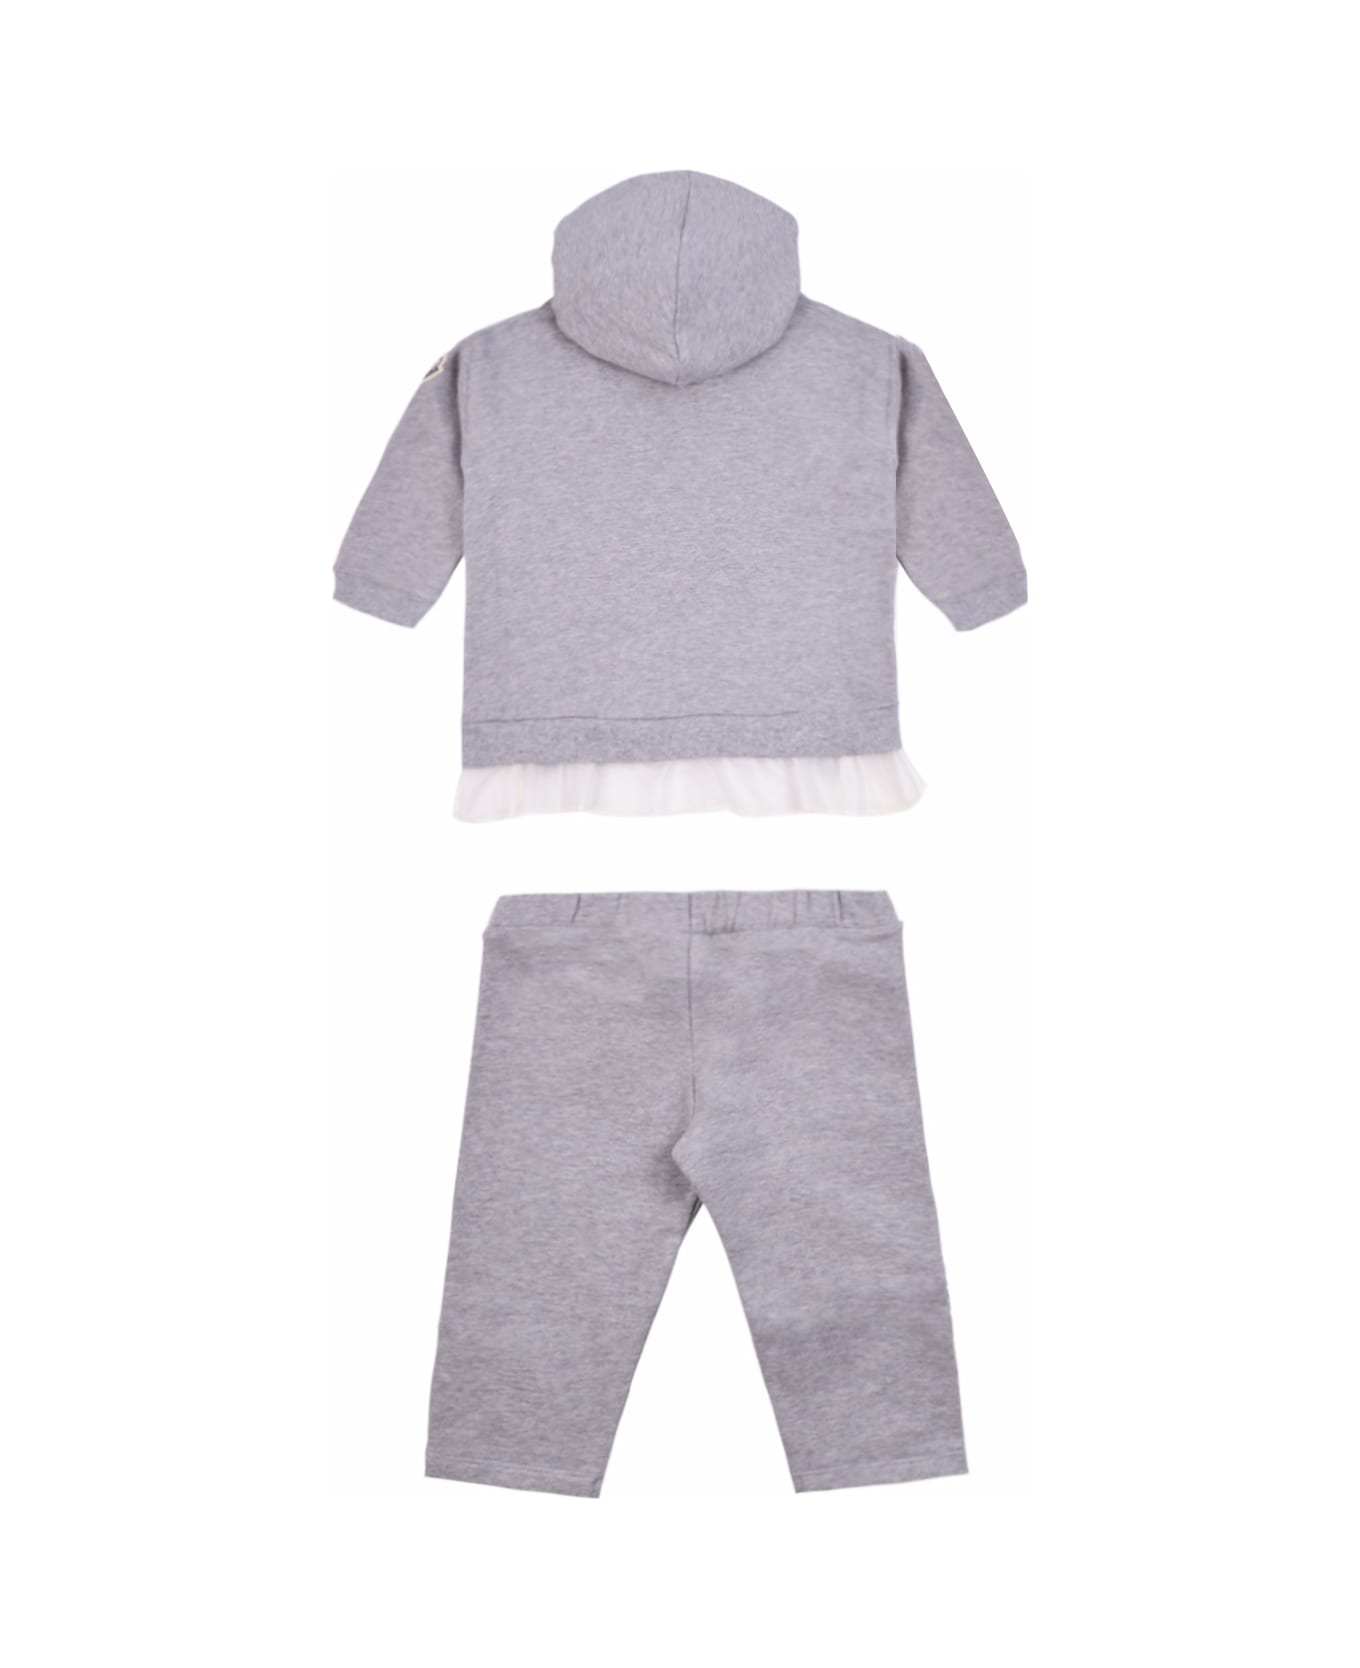 Moncler Cotton Sweatshirt And Trousers - Grey